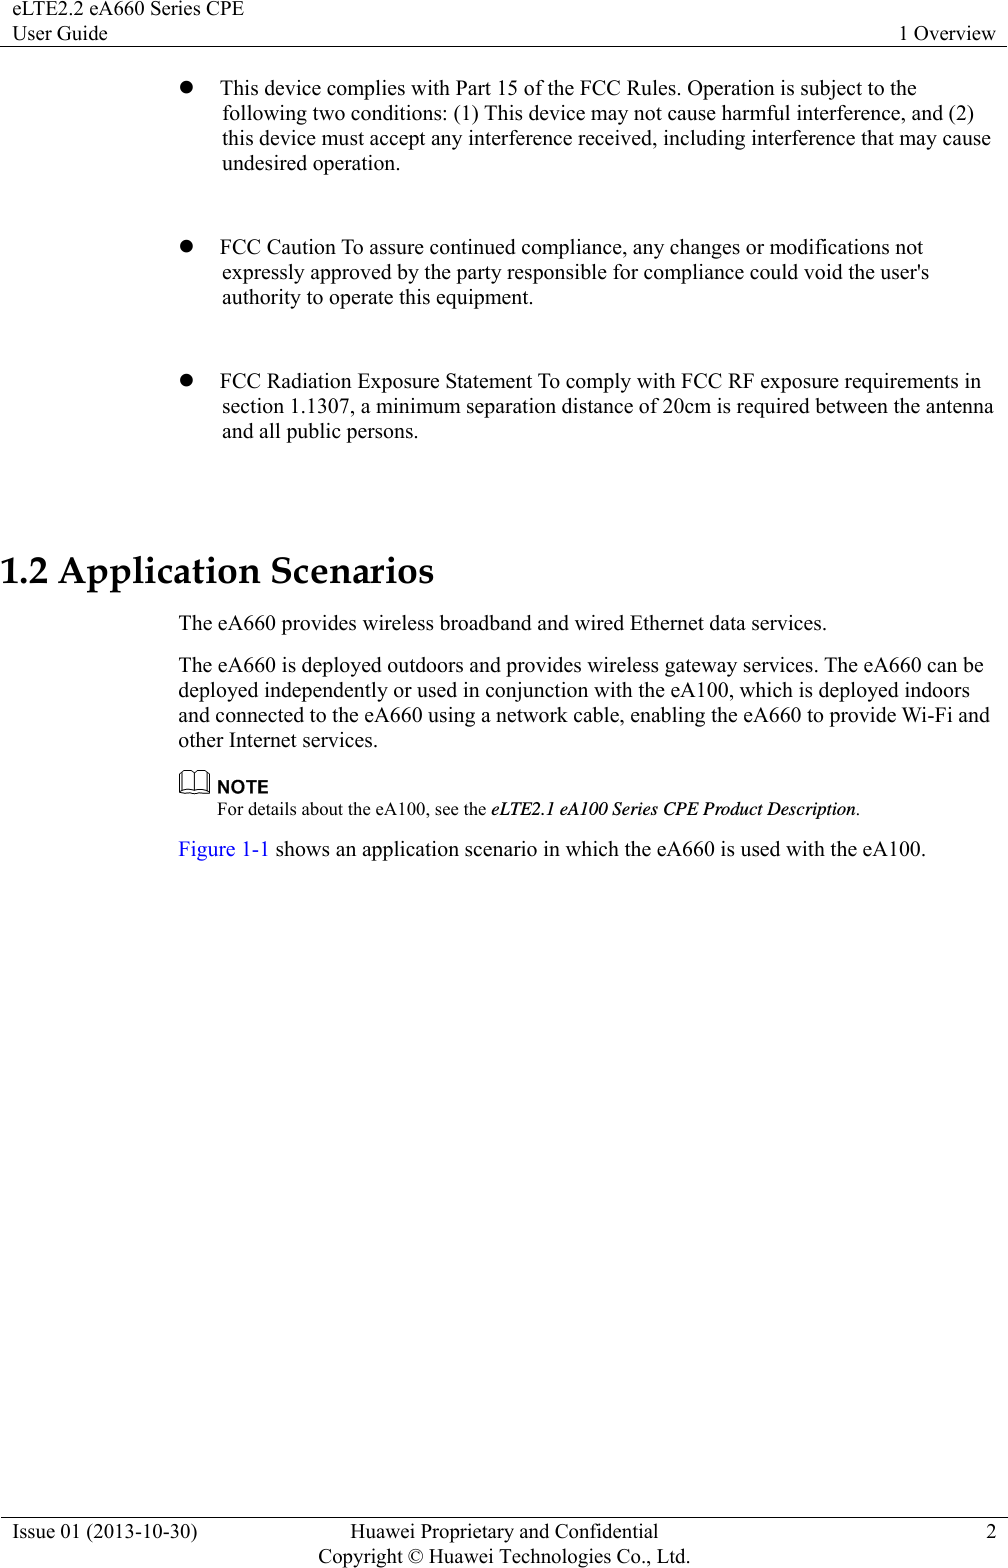 eLTE2.2 eA660 Series CPE User Guide  1 Overview Issue 01 (2013-10-30)  Huawei Proprietary and Confidential         Copyright © Huawei Technologies Co., Ltd.2 z This device complies with Part 15 of the FCC Rules. Operation is subject to the following two conditions: (1) This device may not cause harmful interference, and (2) this device must accept any interference received, including interference that may cause undesired operation.    z FCC Caution To assure continued compliance, any changes or modifications not expressly approved by the party responsible for compliance could void the user&apos;s authority to operate this equipment.  z FCC Radiation Exposure Statement To comply with FCC RF exposure requirements in section 1.1307, a minimum separation distance of 20cm is required between the antenna and all public persons.  1.2 Application Scenarios The eA660 provides wireless broadband and wired Ethernet data services. The eA660 is deployed outdoors and provides wireless gateway services. The eA660 can be deployed independently or used in conjunction with the eA100, which is deployed indoors and connected to the eA660 using a network cable, enabling the eA660 to provide Wi-Fi and other Internet services.    For details about the eA100, see the eLTE2.1 eA100 Series CPE Product Description. Figure 1-1 shows an application scenario in which the eA660 is used with the eA100. 